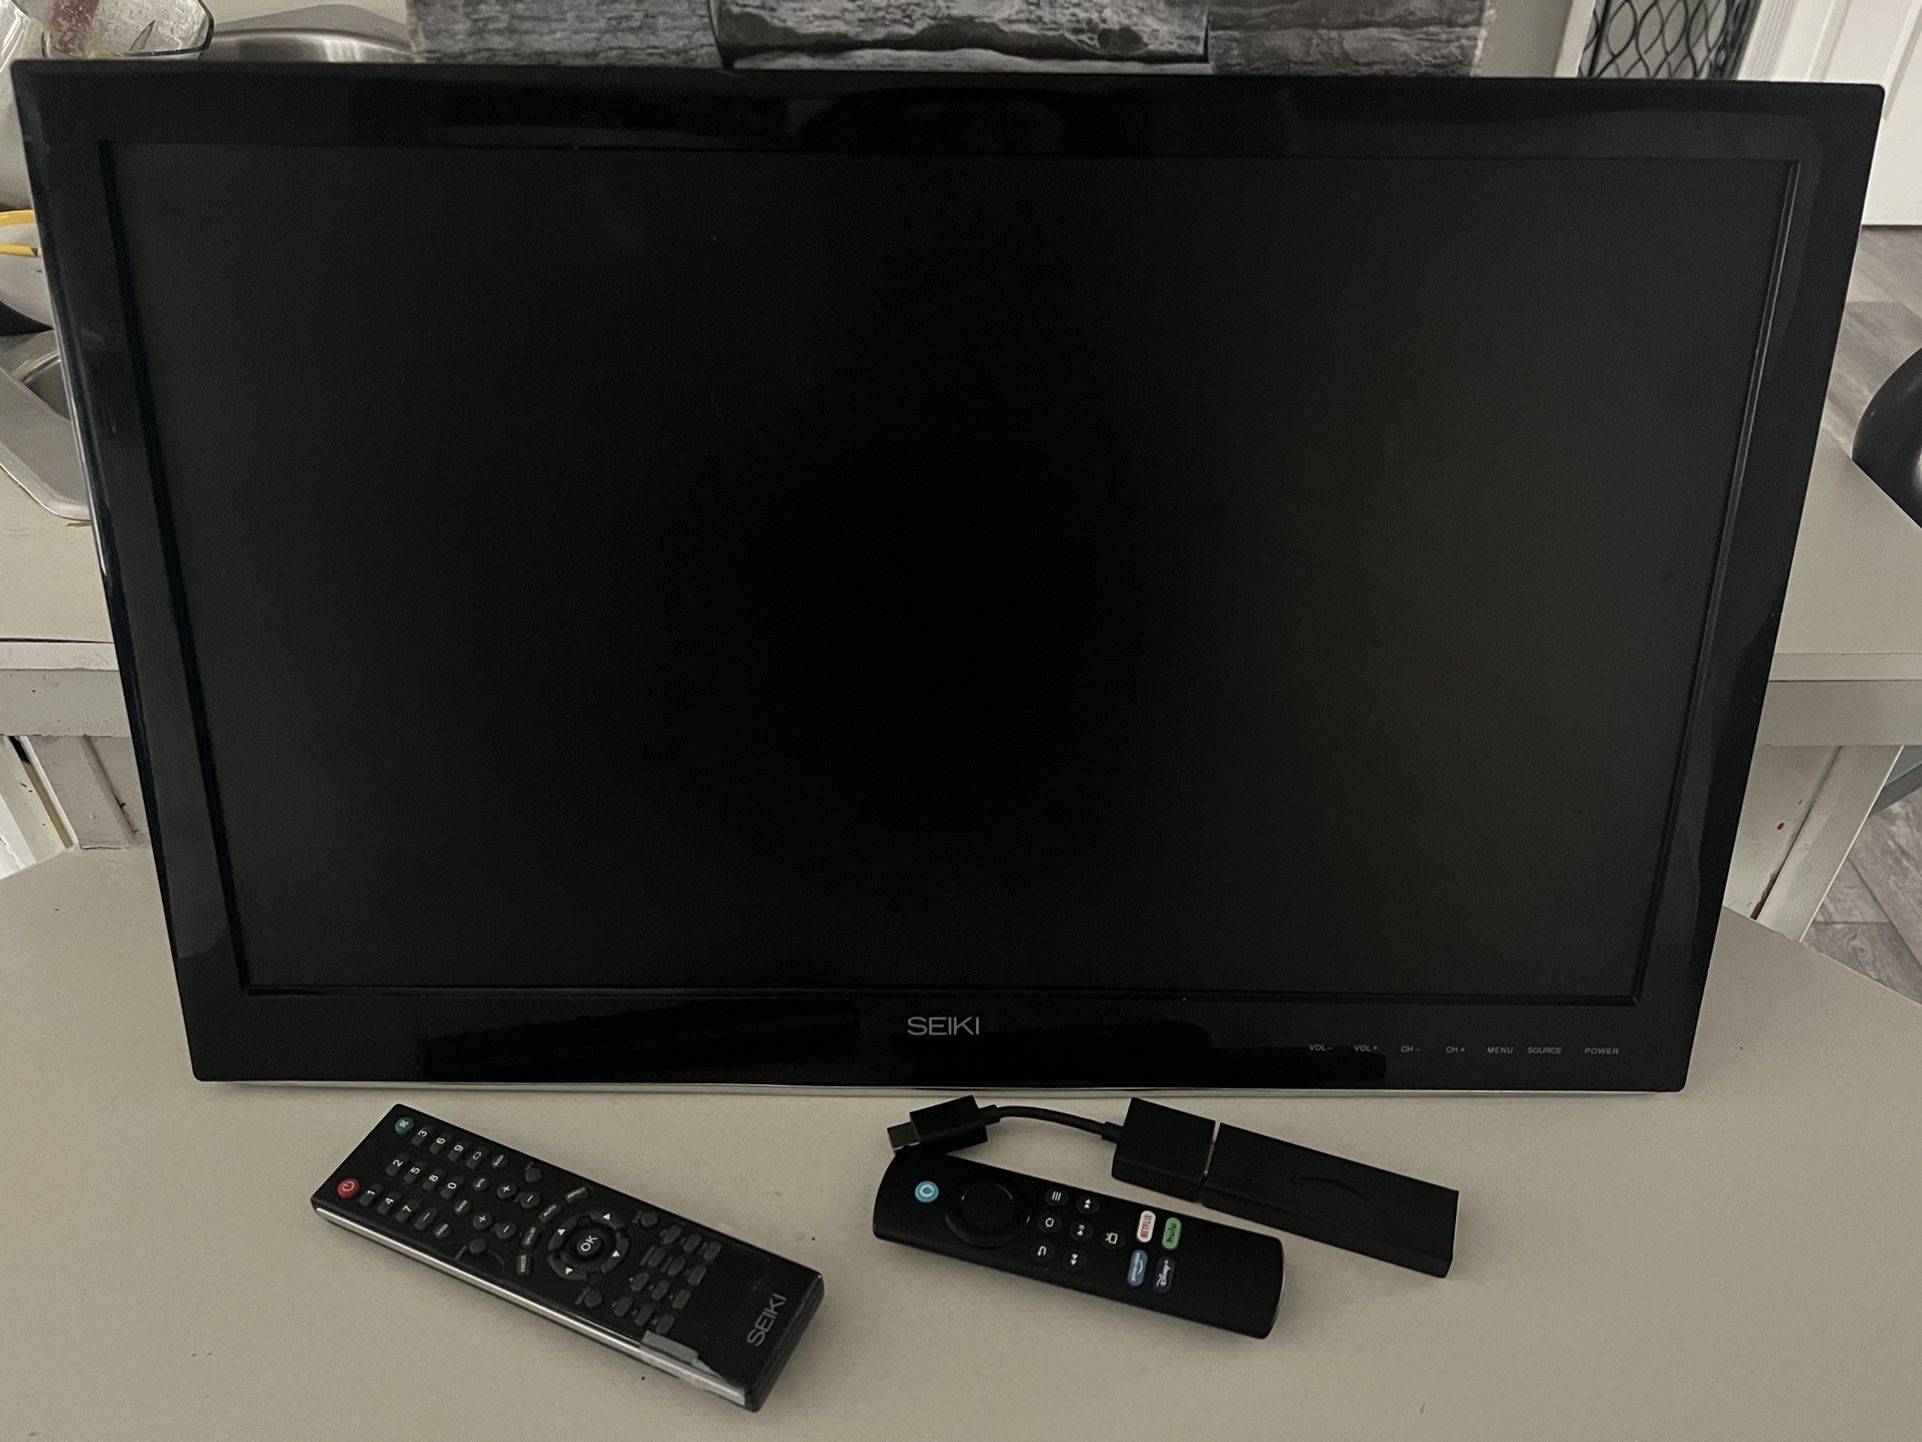 24 Inch Tv And Amazon Fire stick 